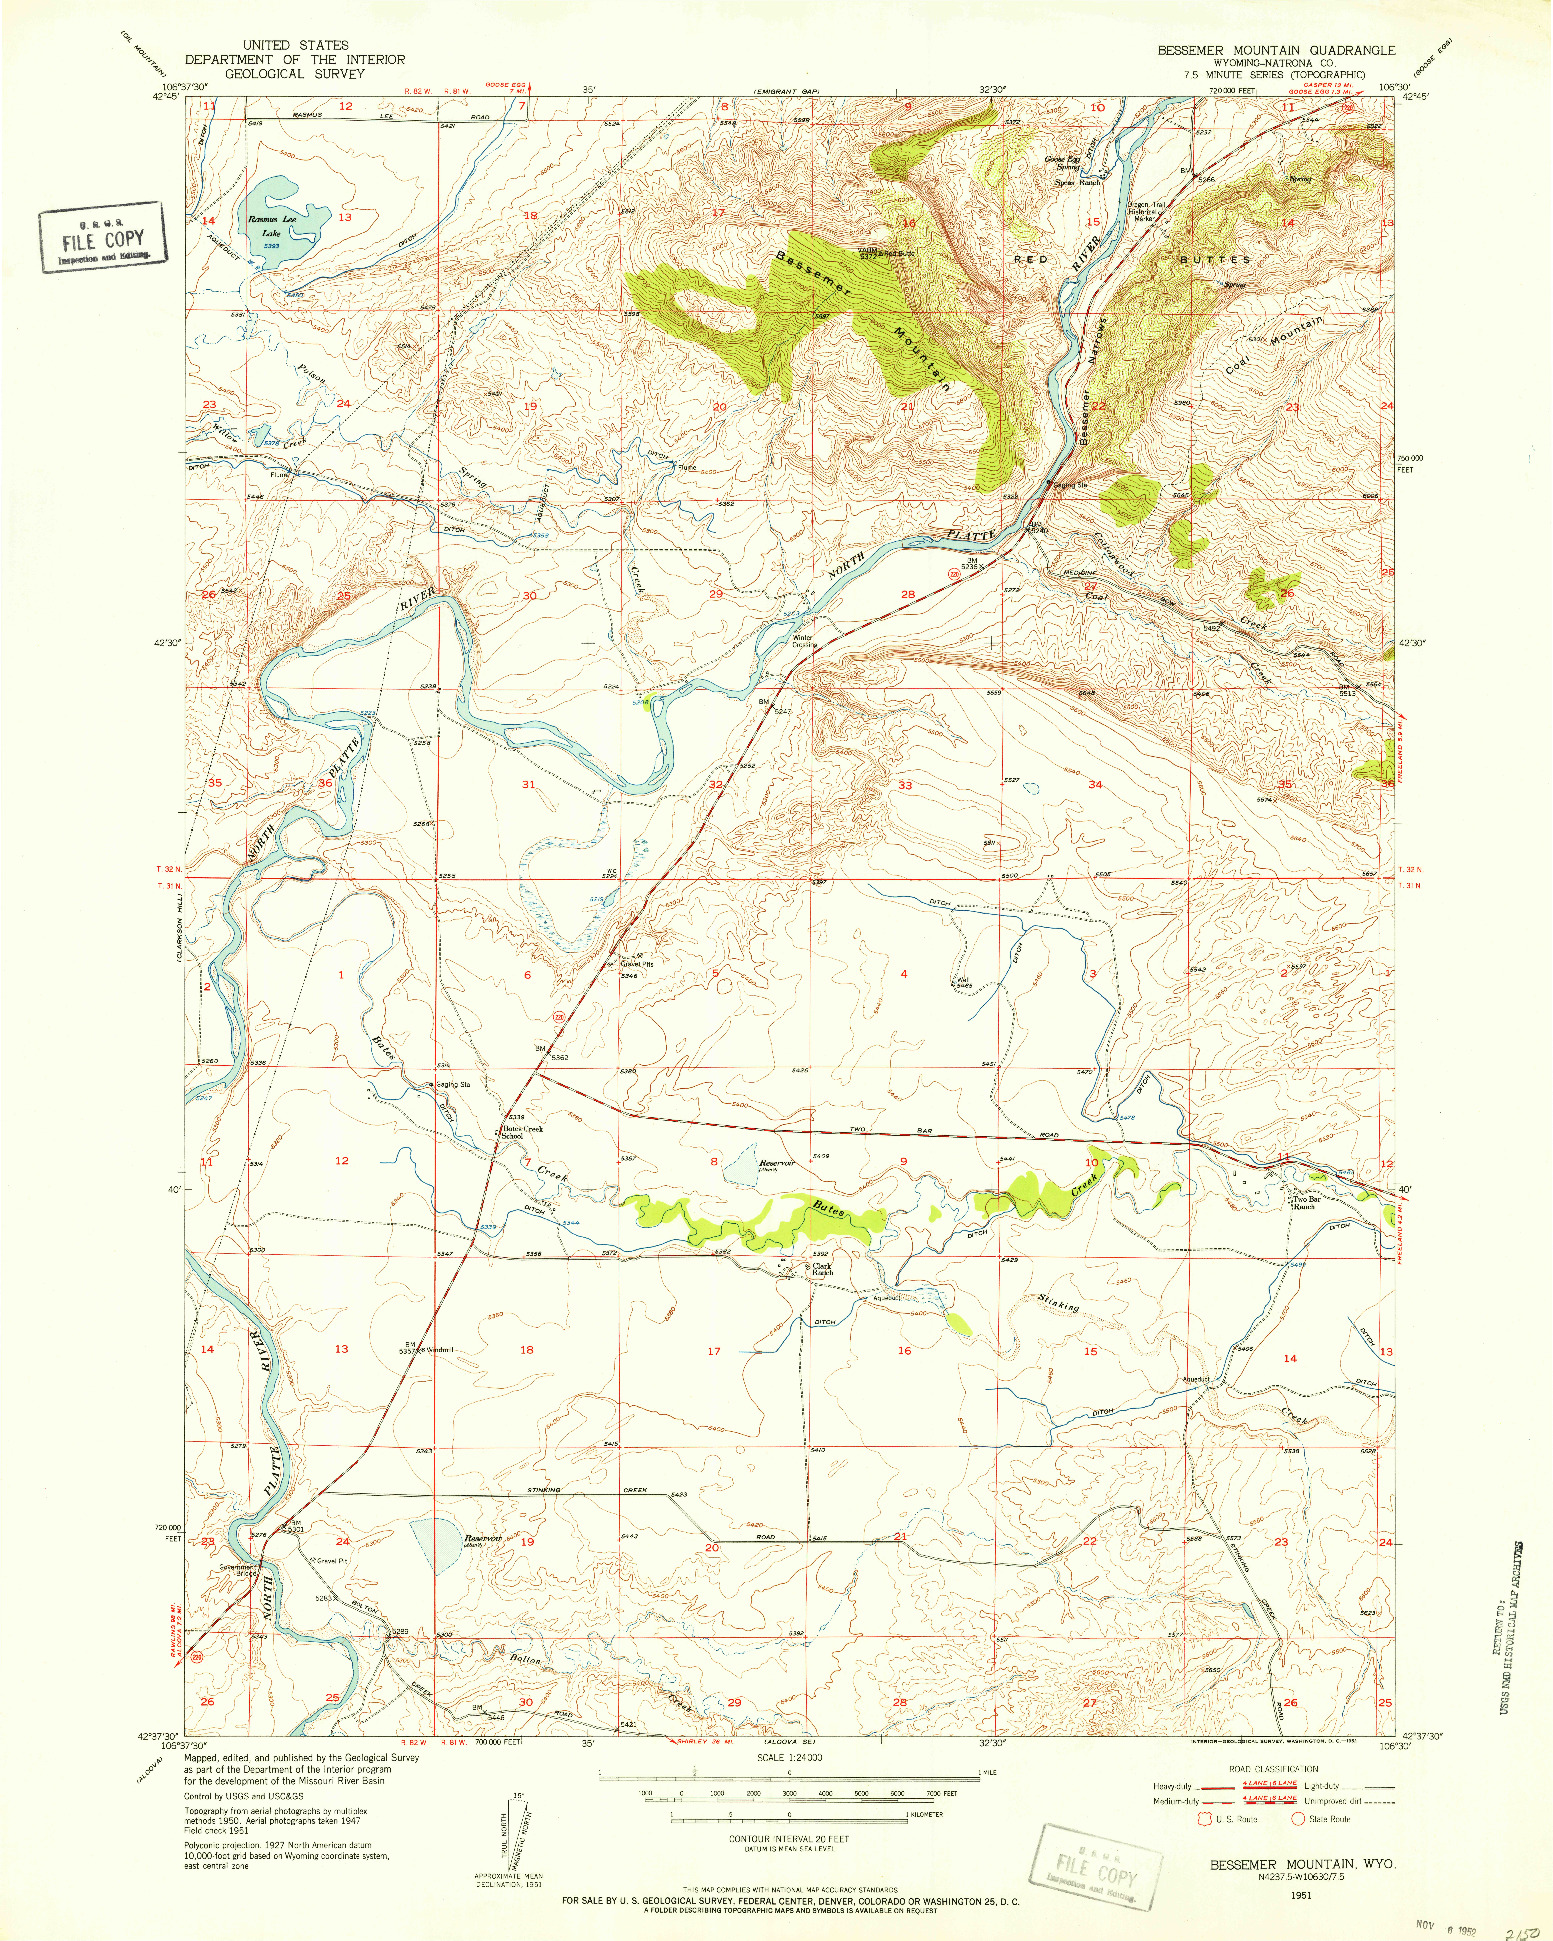 USGS 1:24000-SCALE QUADRANGLE FOR BESSEMER MOUNTAIN, WY 1951